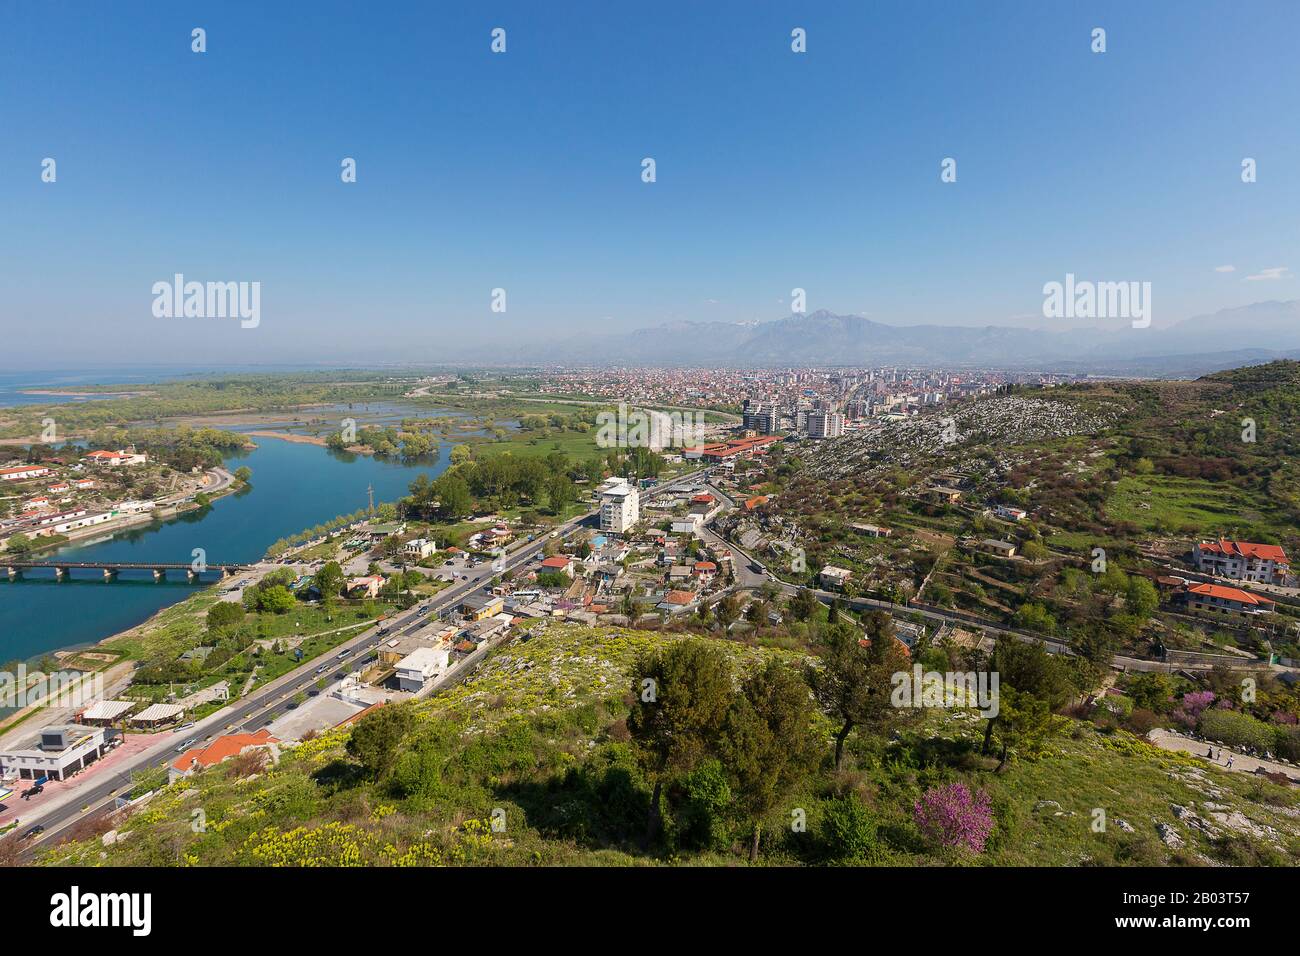 Aerial view over the city of Shkoder in Albania Stock Photo